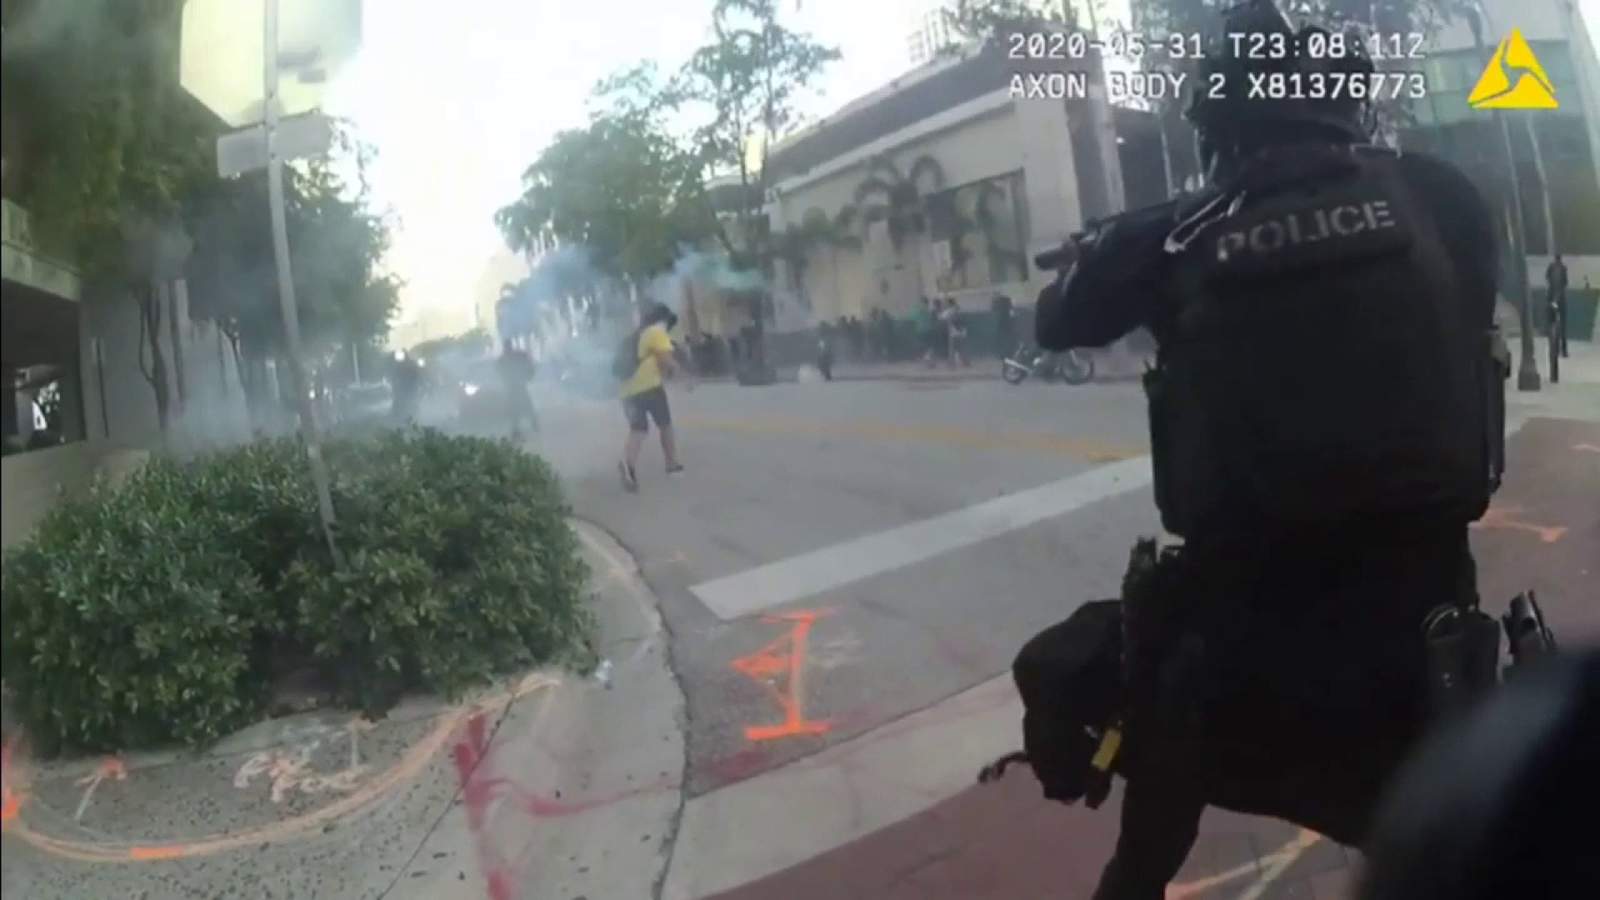 Body-cam footage from late May protest appears to show Fort Lauderdale officers swearing, laughing at demonstrators